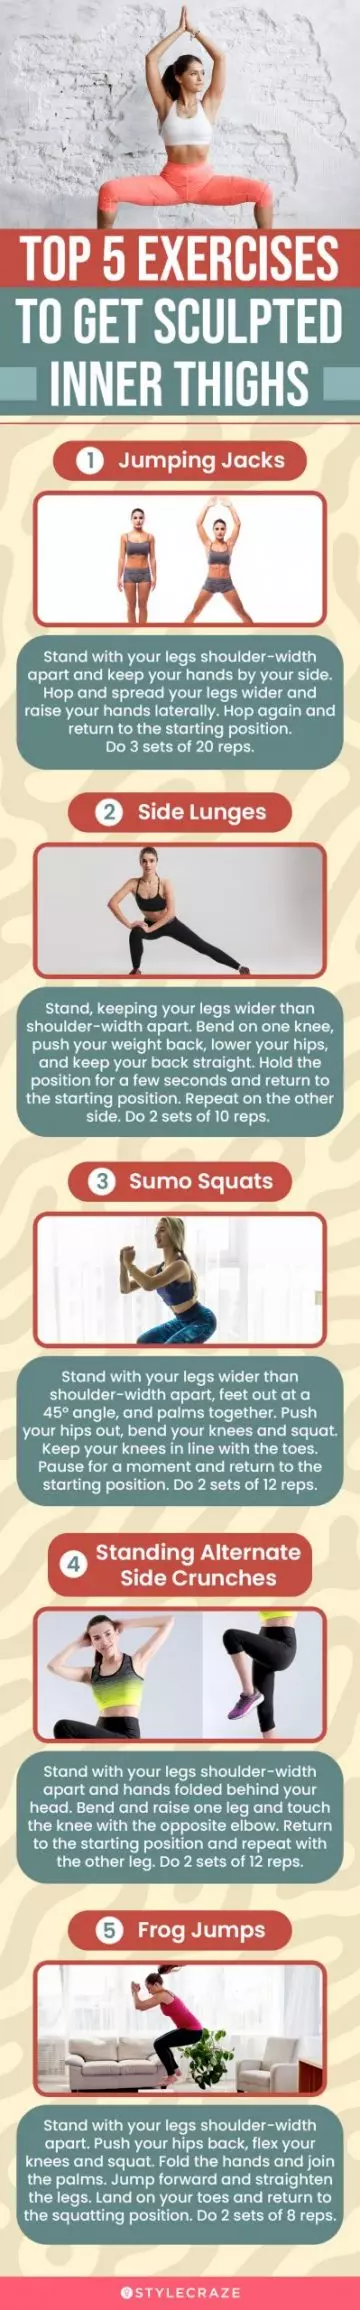 top 5 exercises to get sculpted inner thighs (infographic)